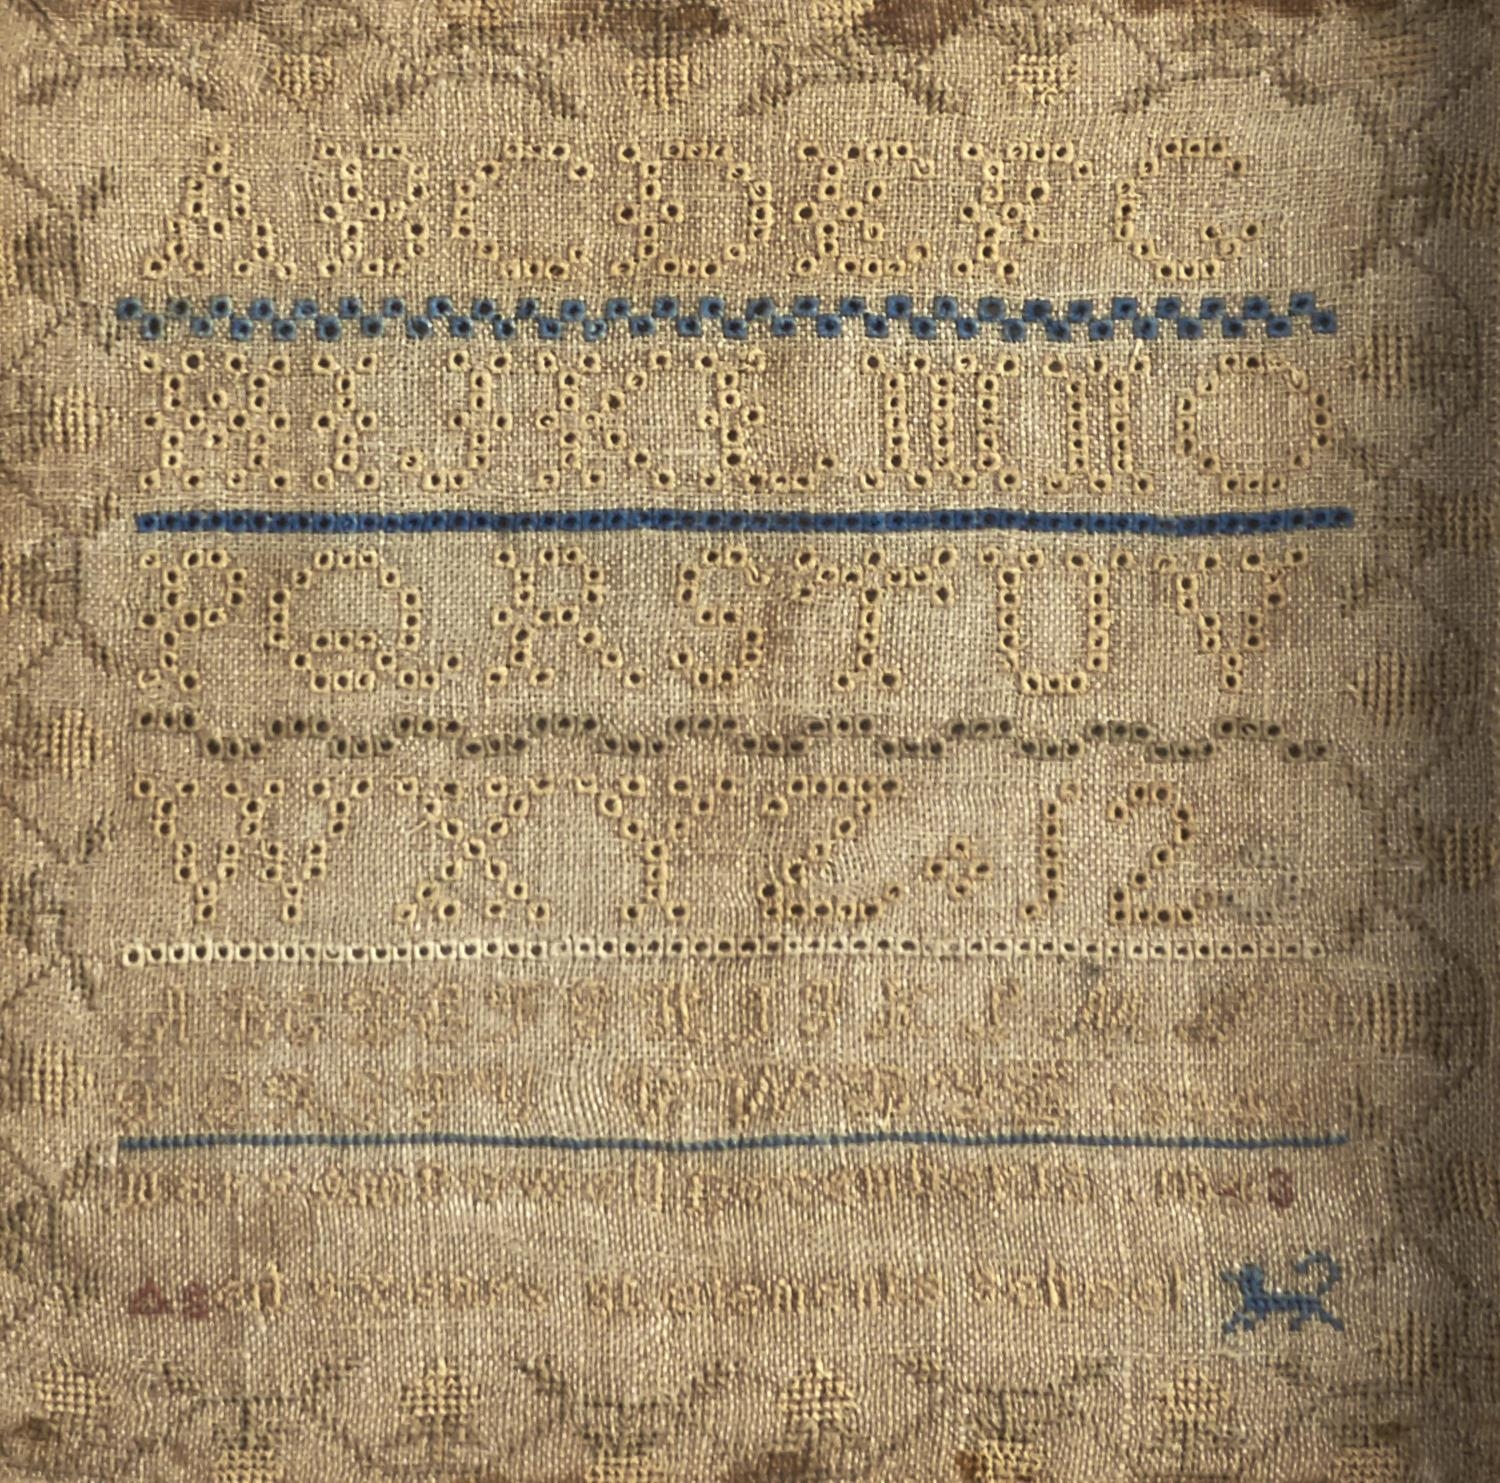 An English linen sampler, early 19th c, 29 x 29cm, maple frame Faded, veneers on frame chipped,